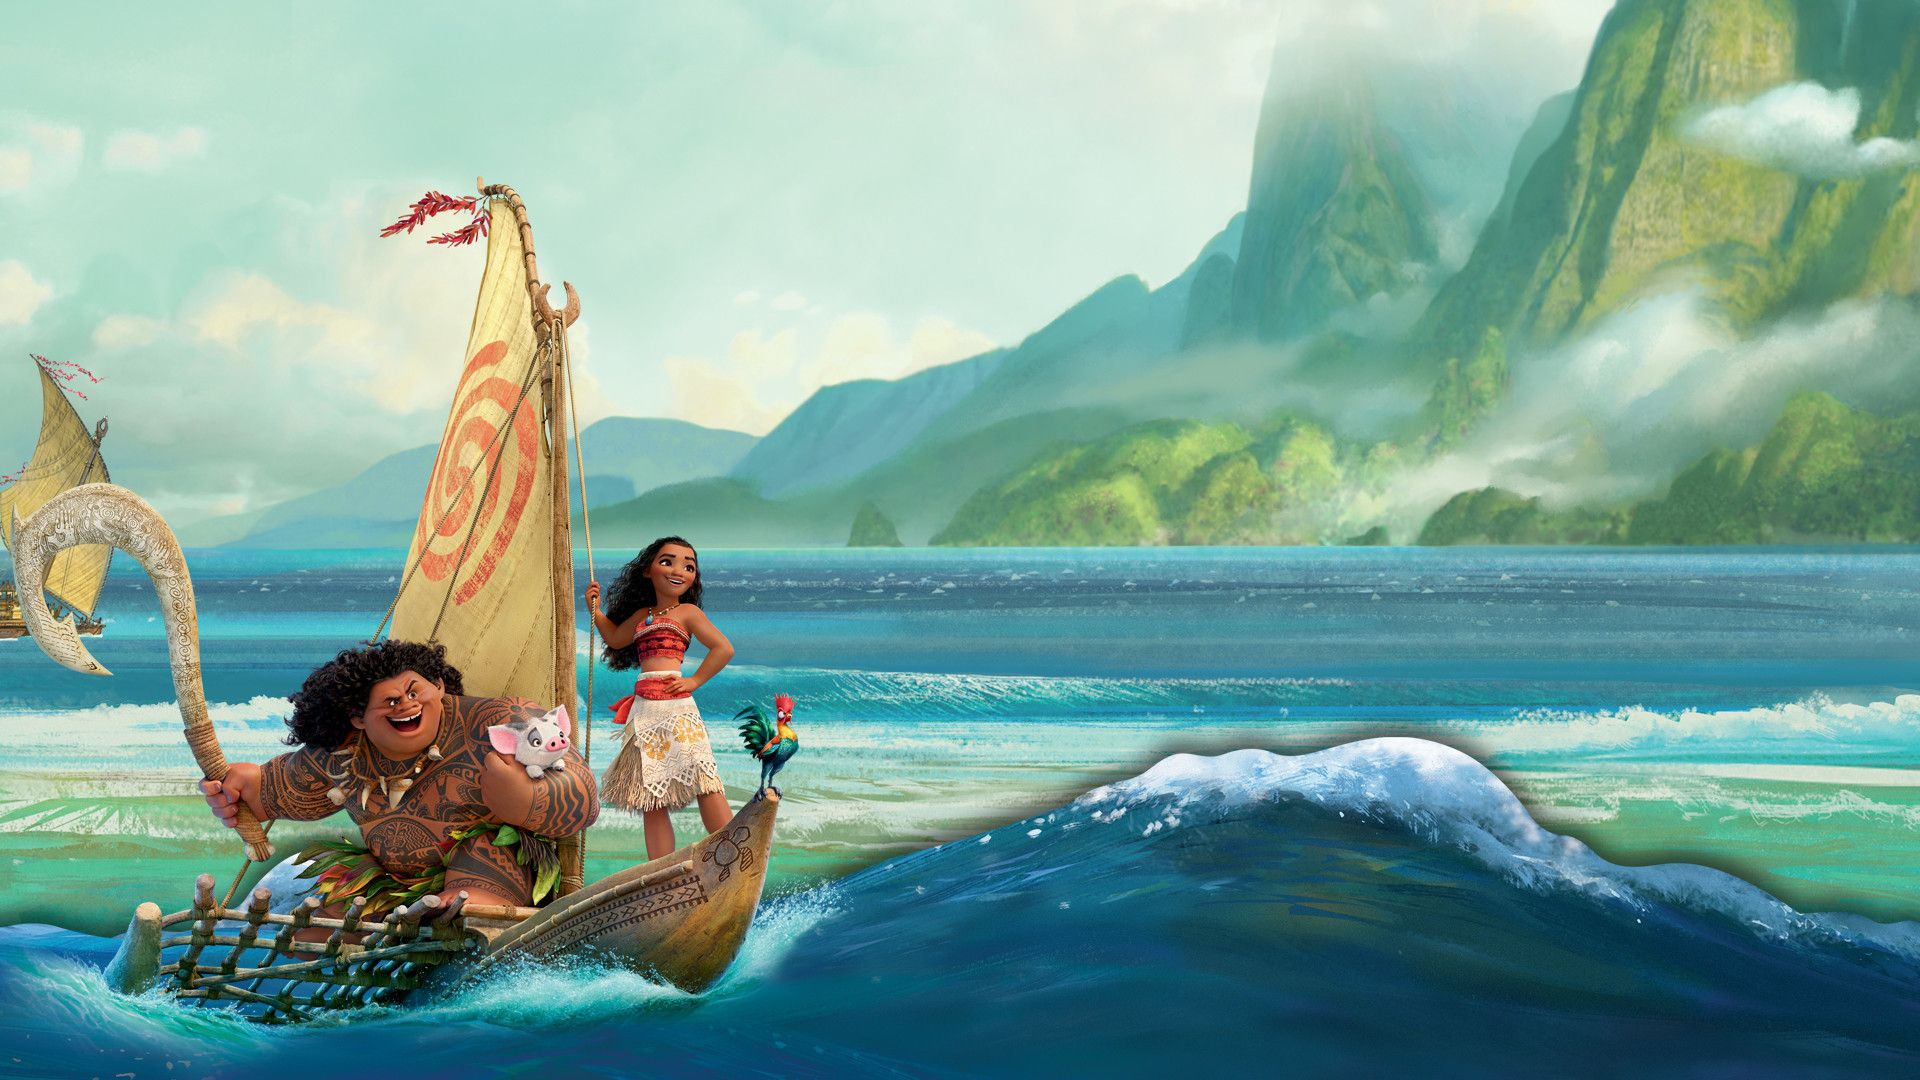 Background image for Movies On The Lawn: Moana 